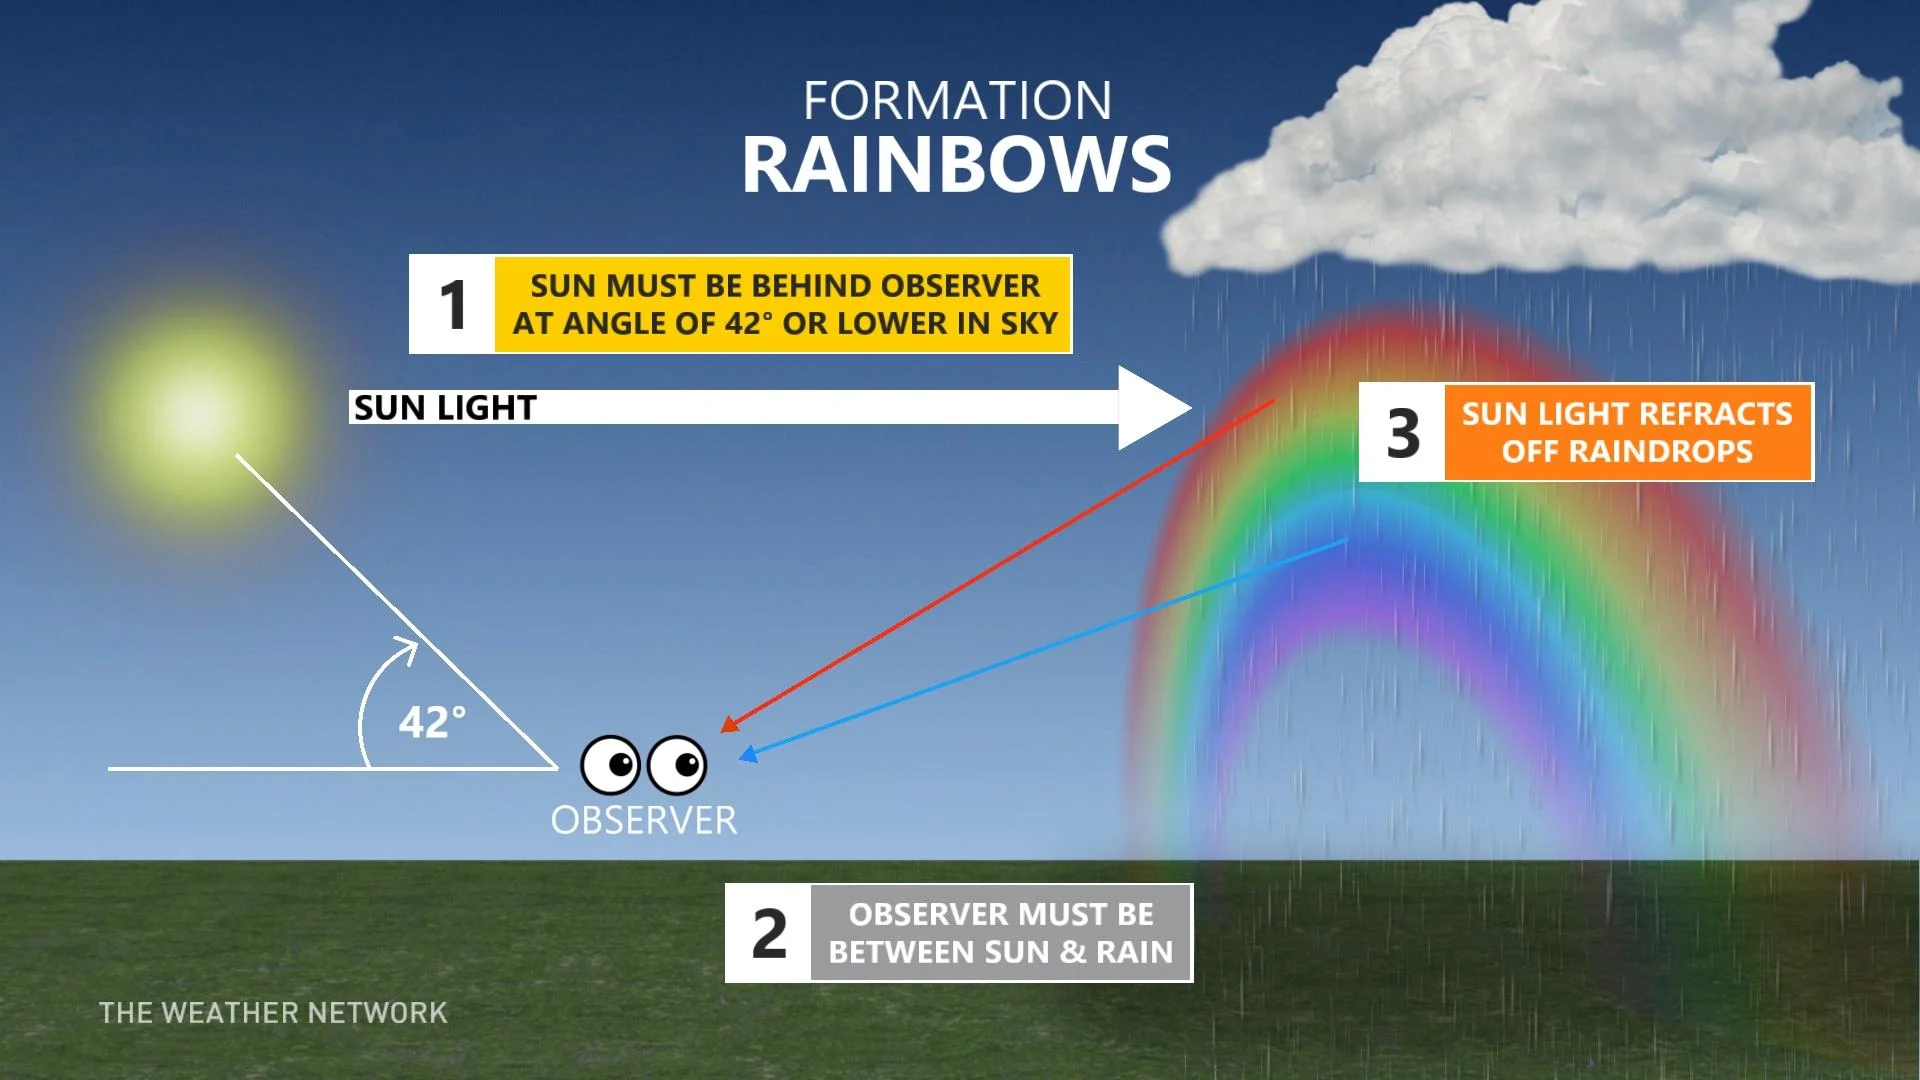 Rainbow formation explainer - Baron/The Weather Network